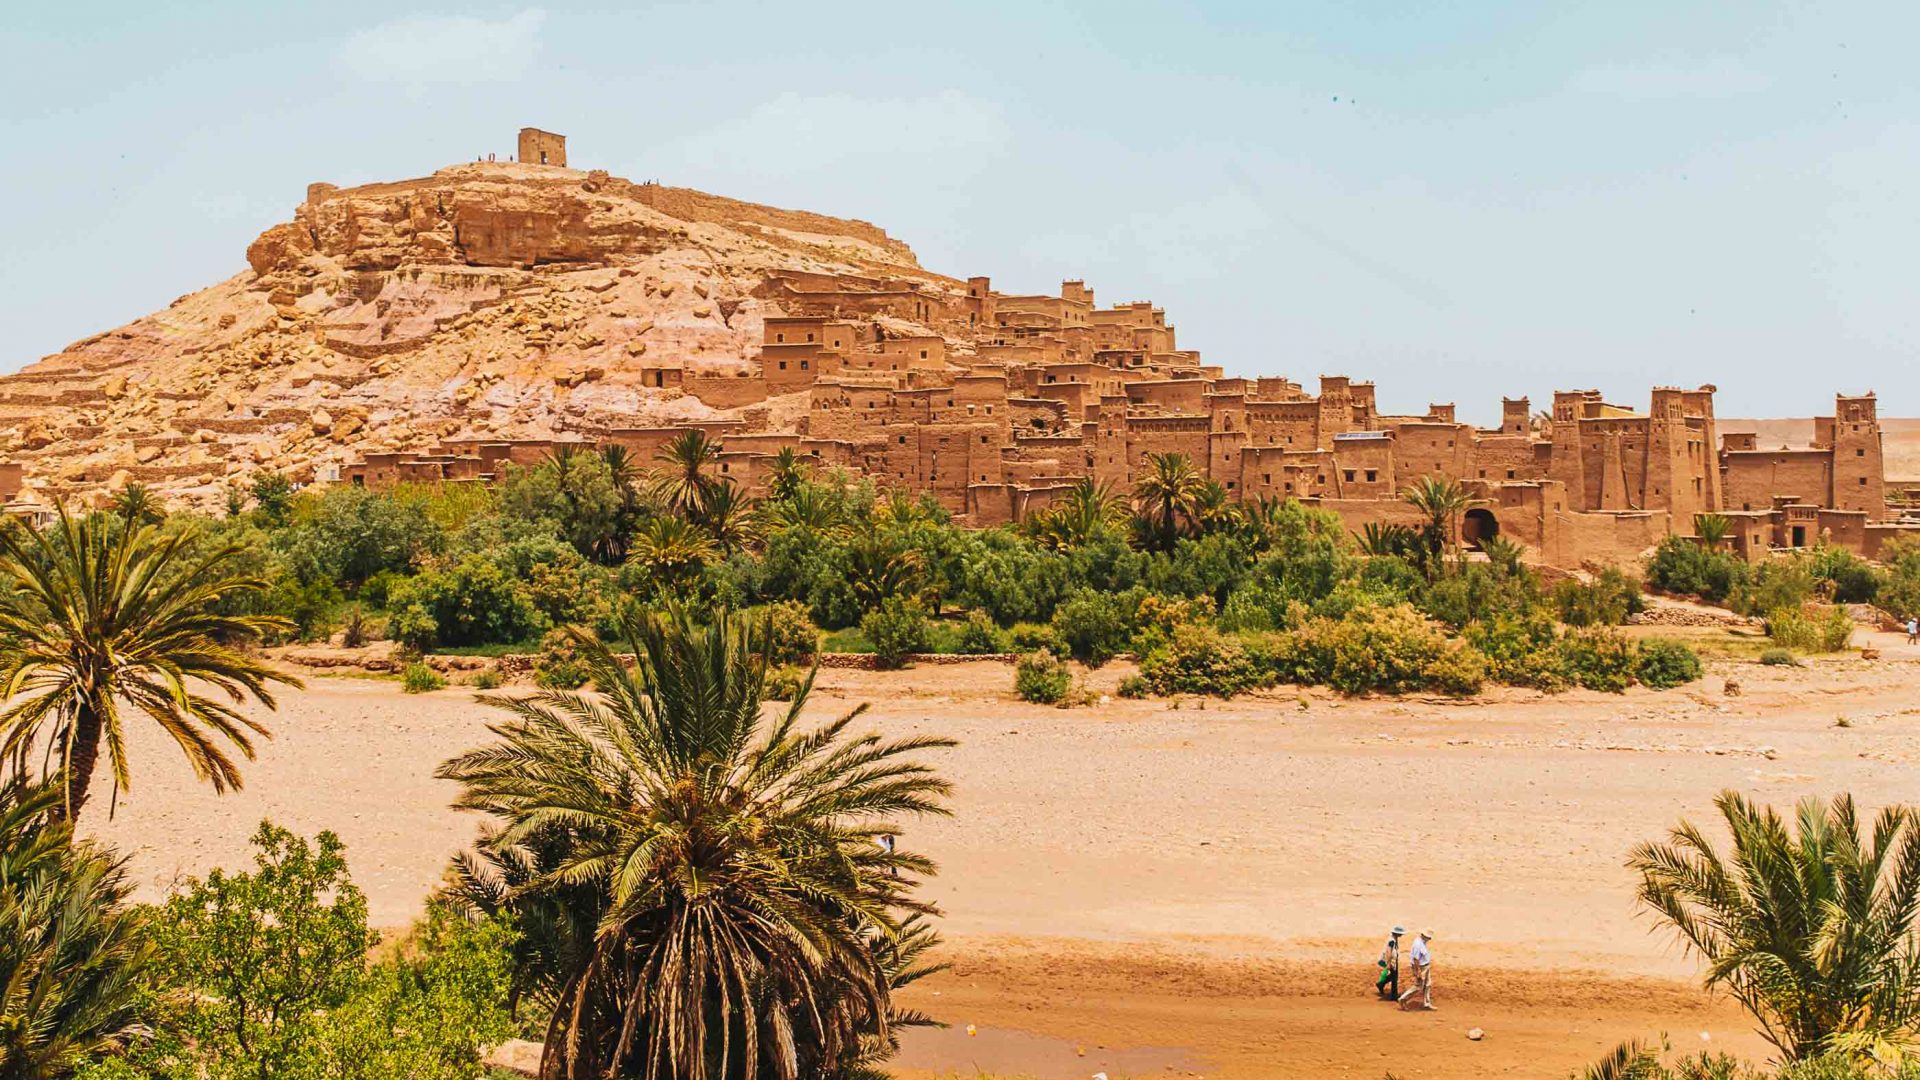 Ait Benhaddou surrounded by green vegetation.